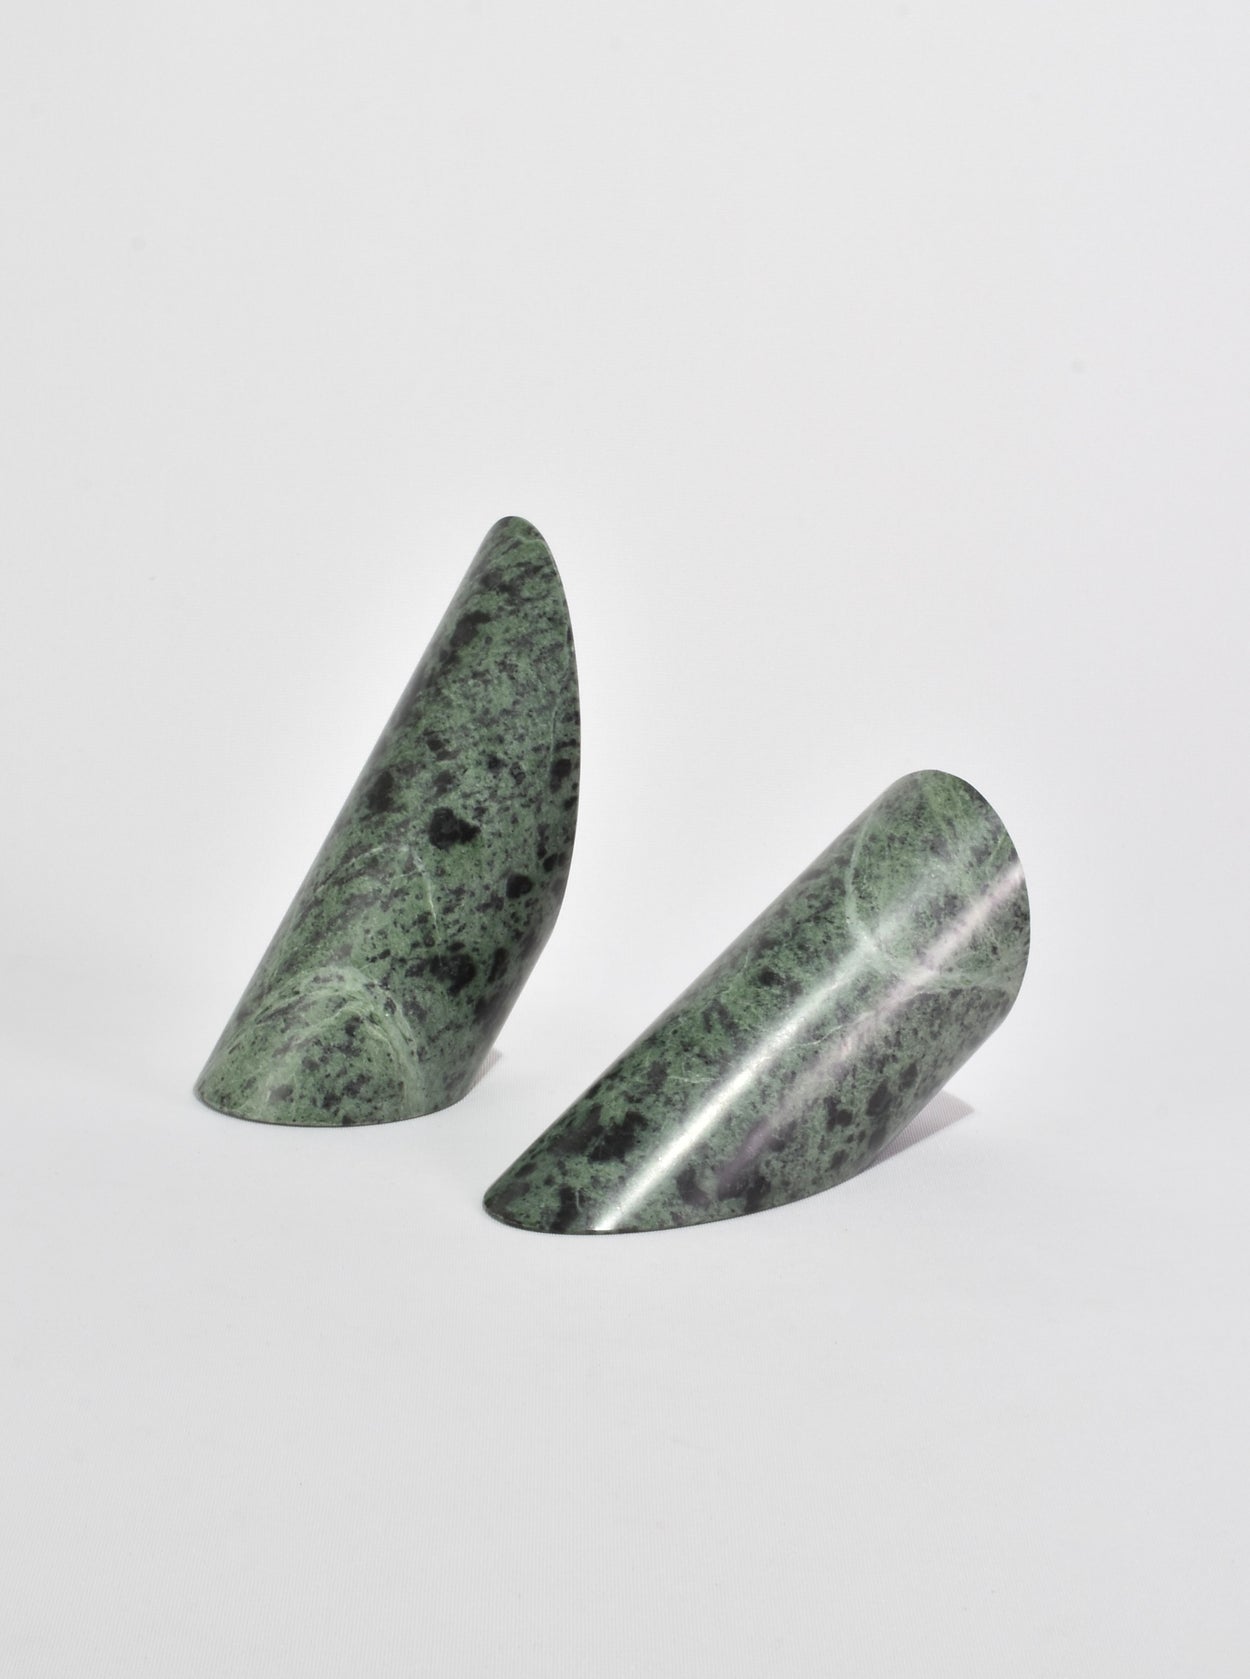 Green Slanted Stone Bookends